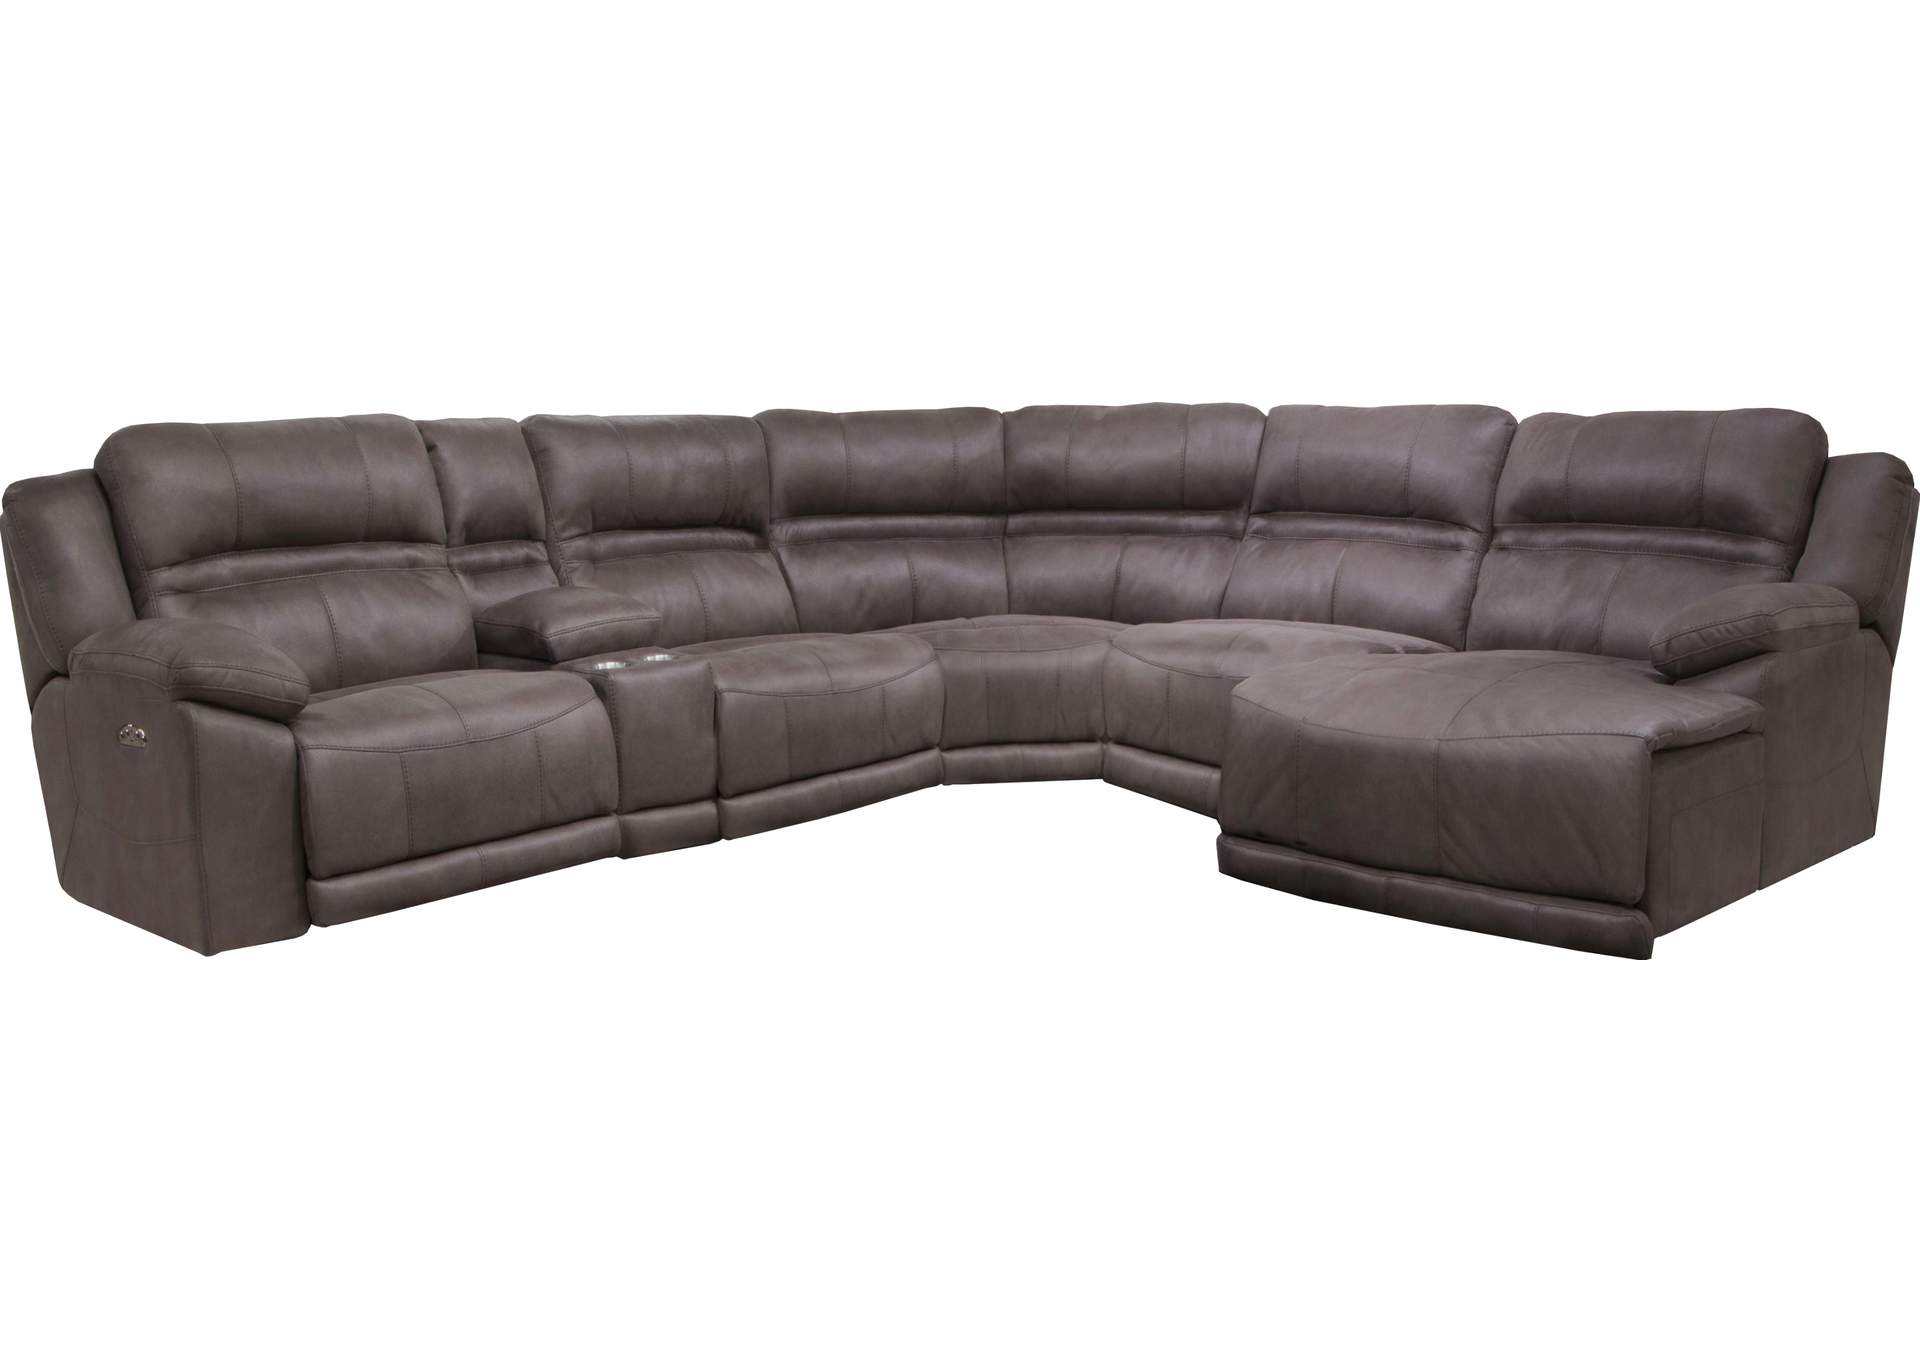 Braxton Charcoal RAF Chaise Sectional,Jackson Catnapper